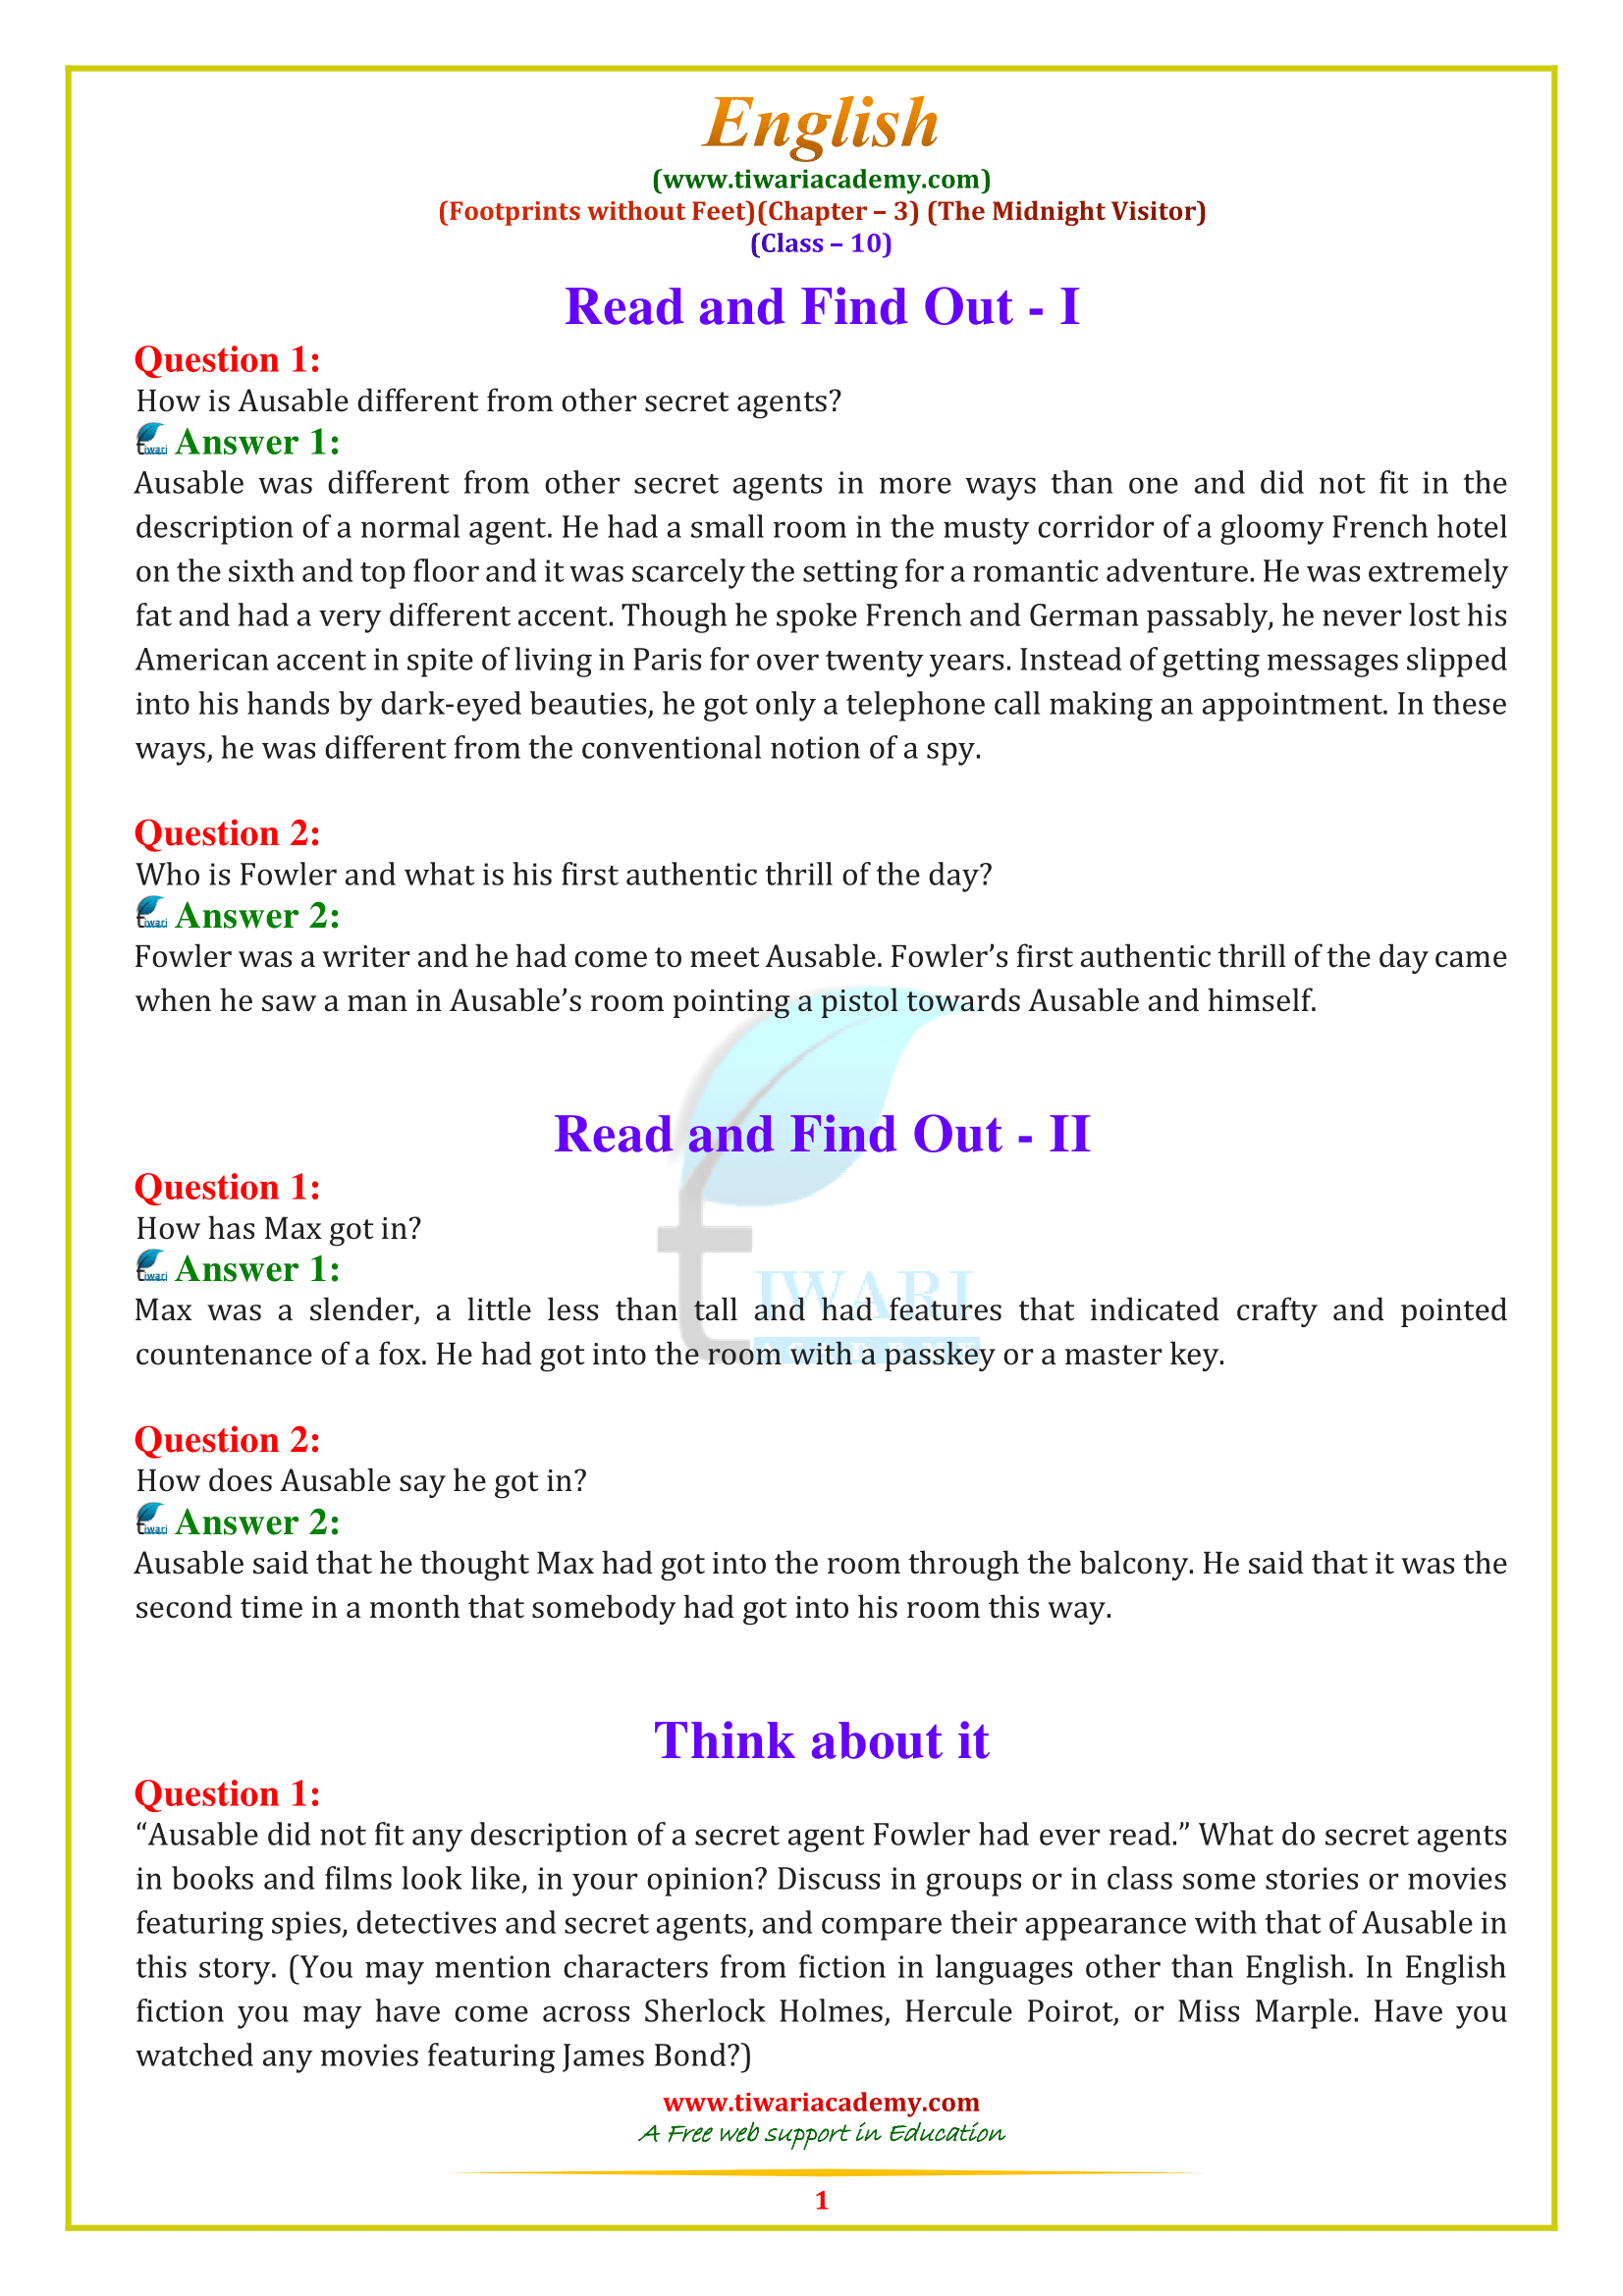 NCERT Solutions for Class 10 English Footprints without feet chapter 3